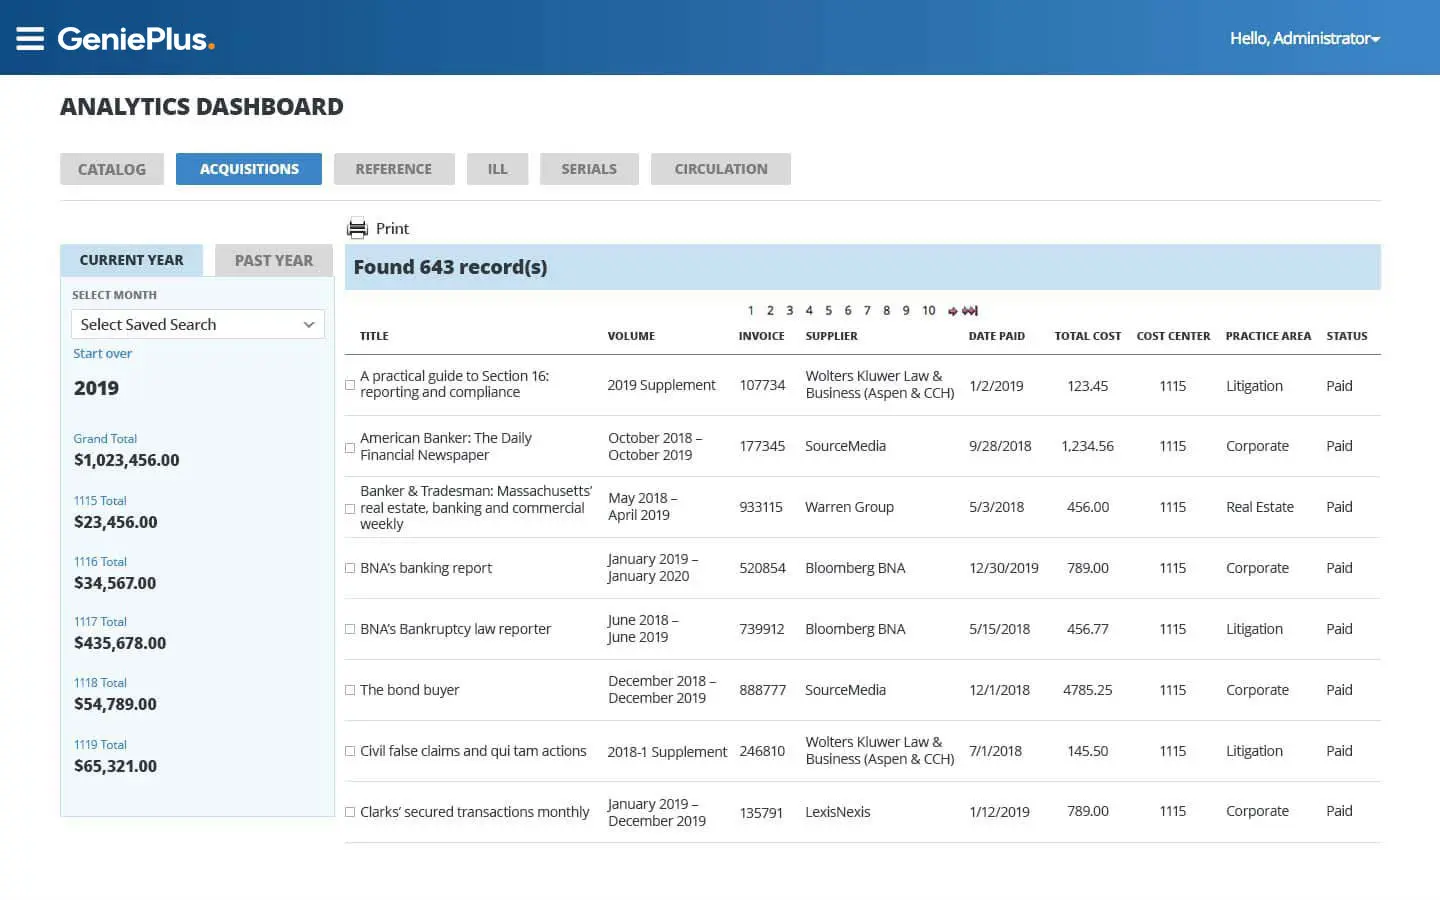 An image of the Analytics Dashboard